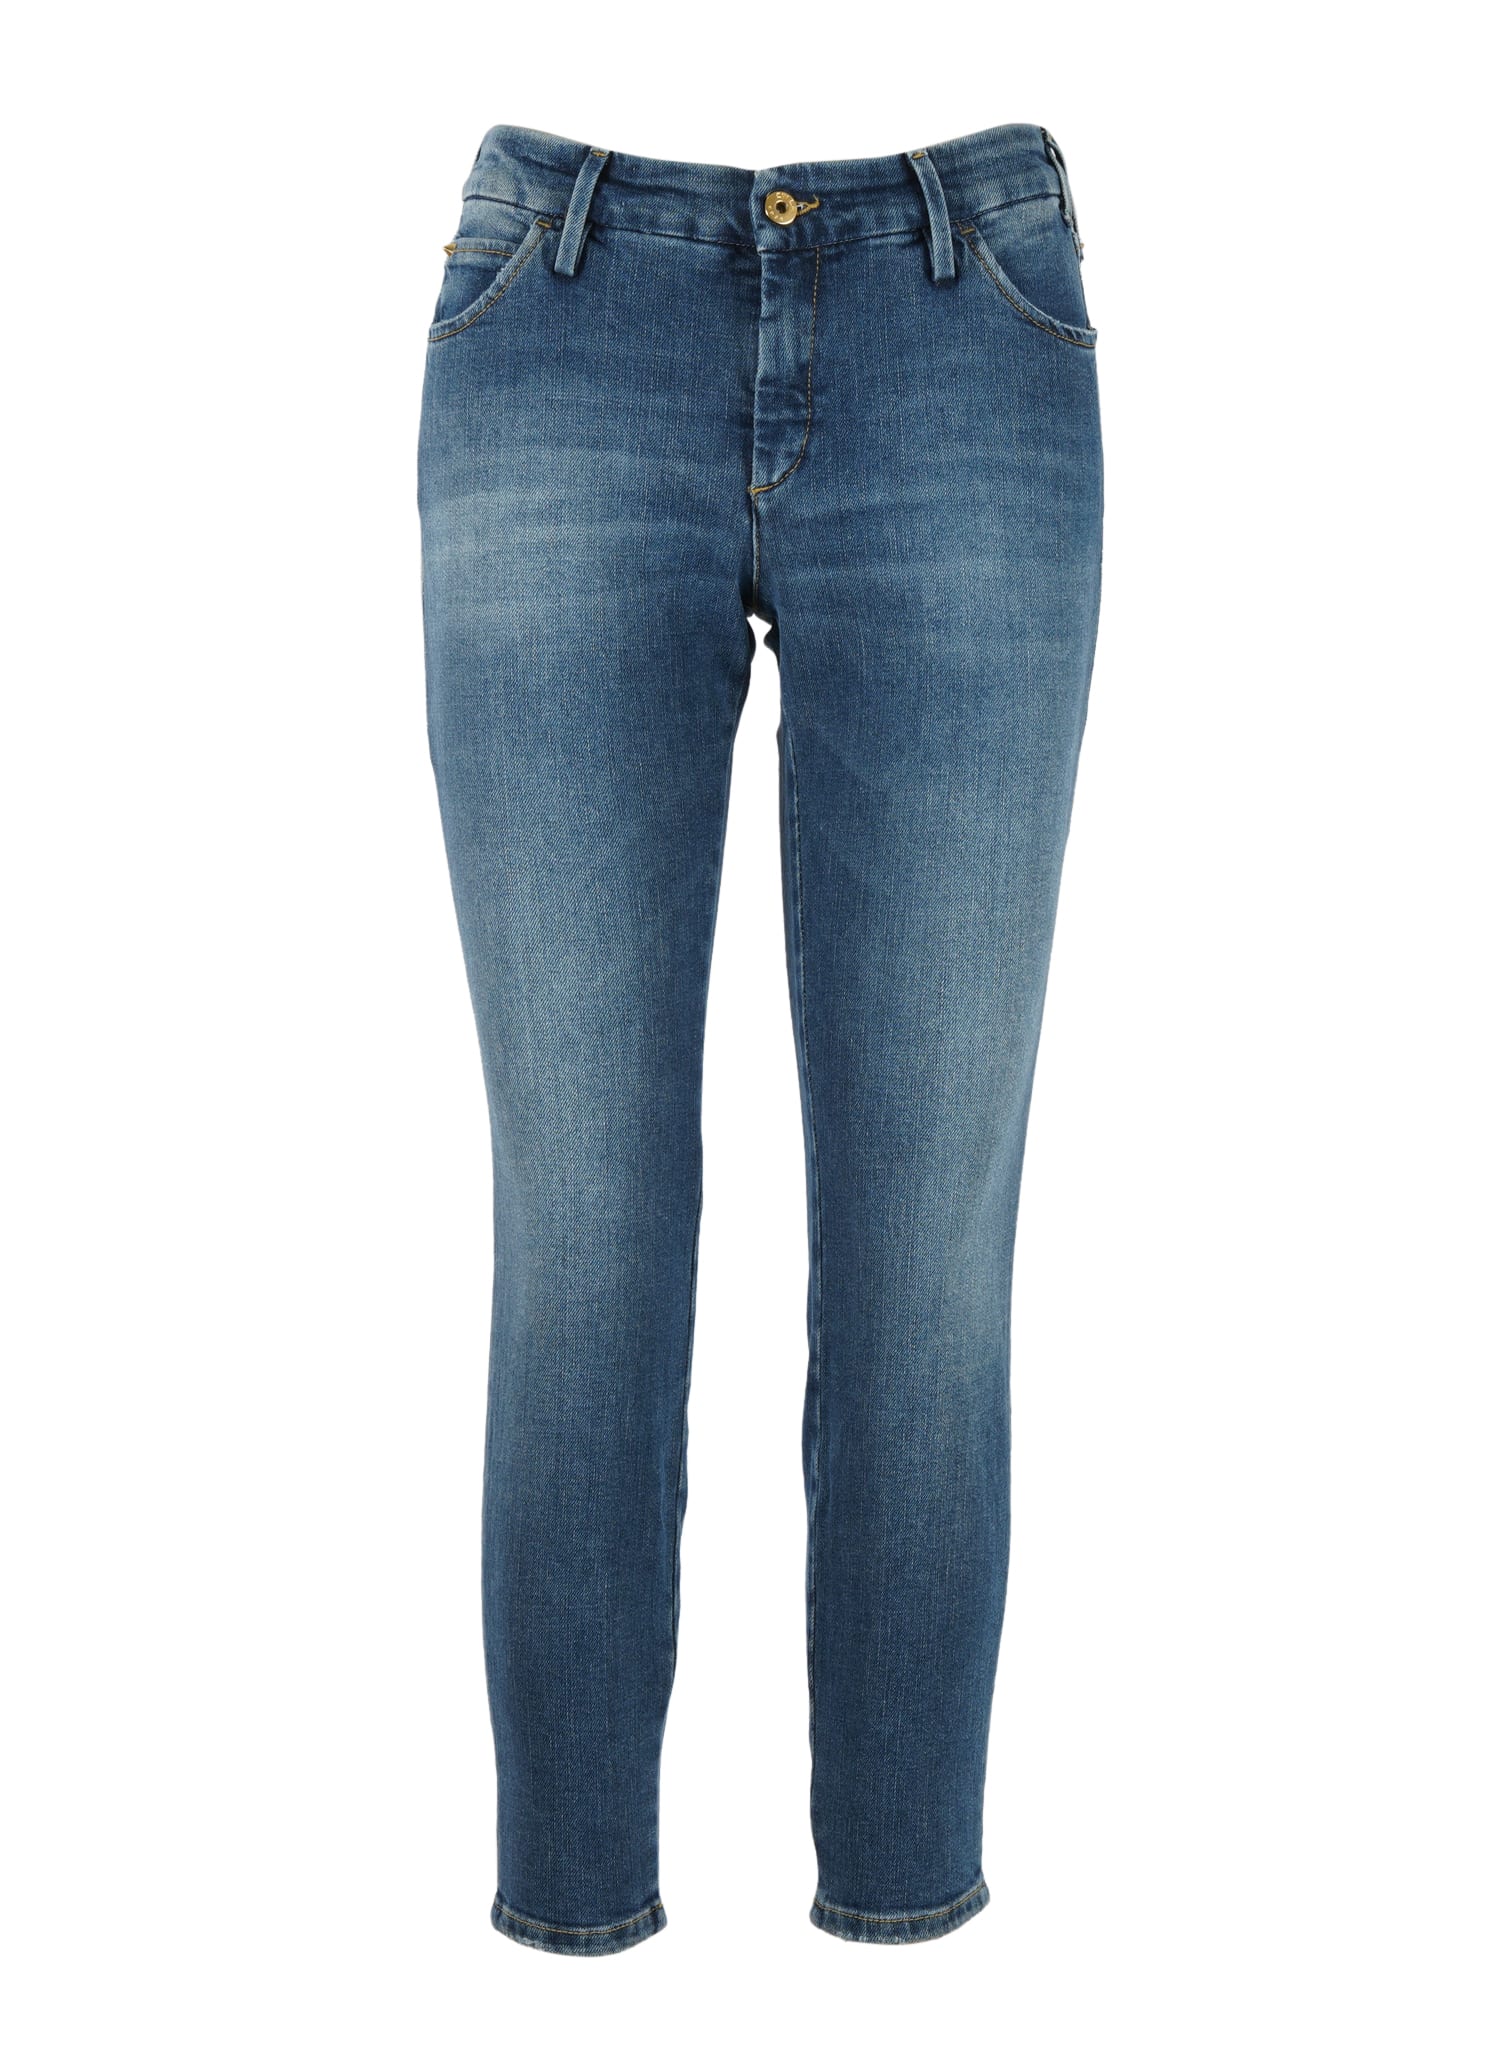 Cycle Brigitte Tailor Ankle Jeans